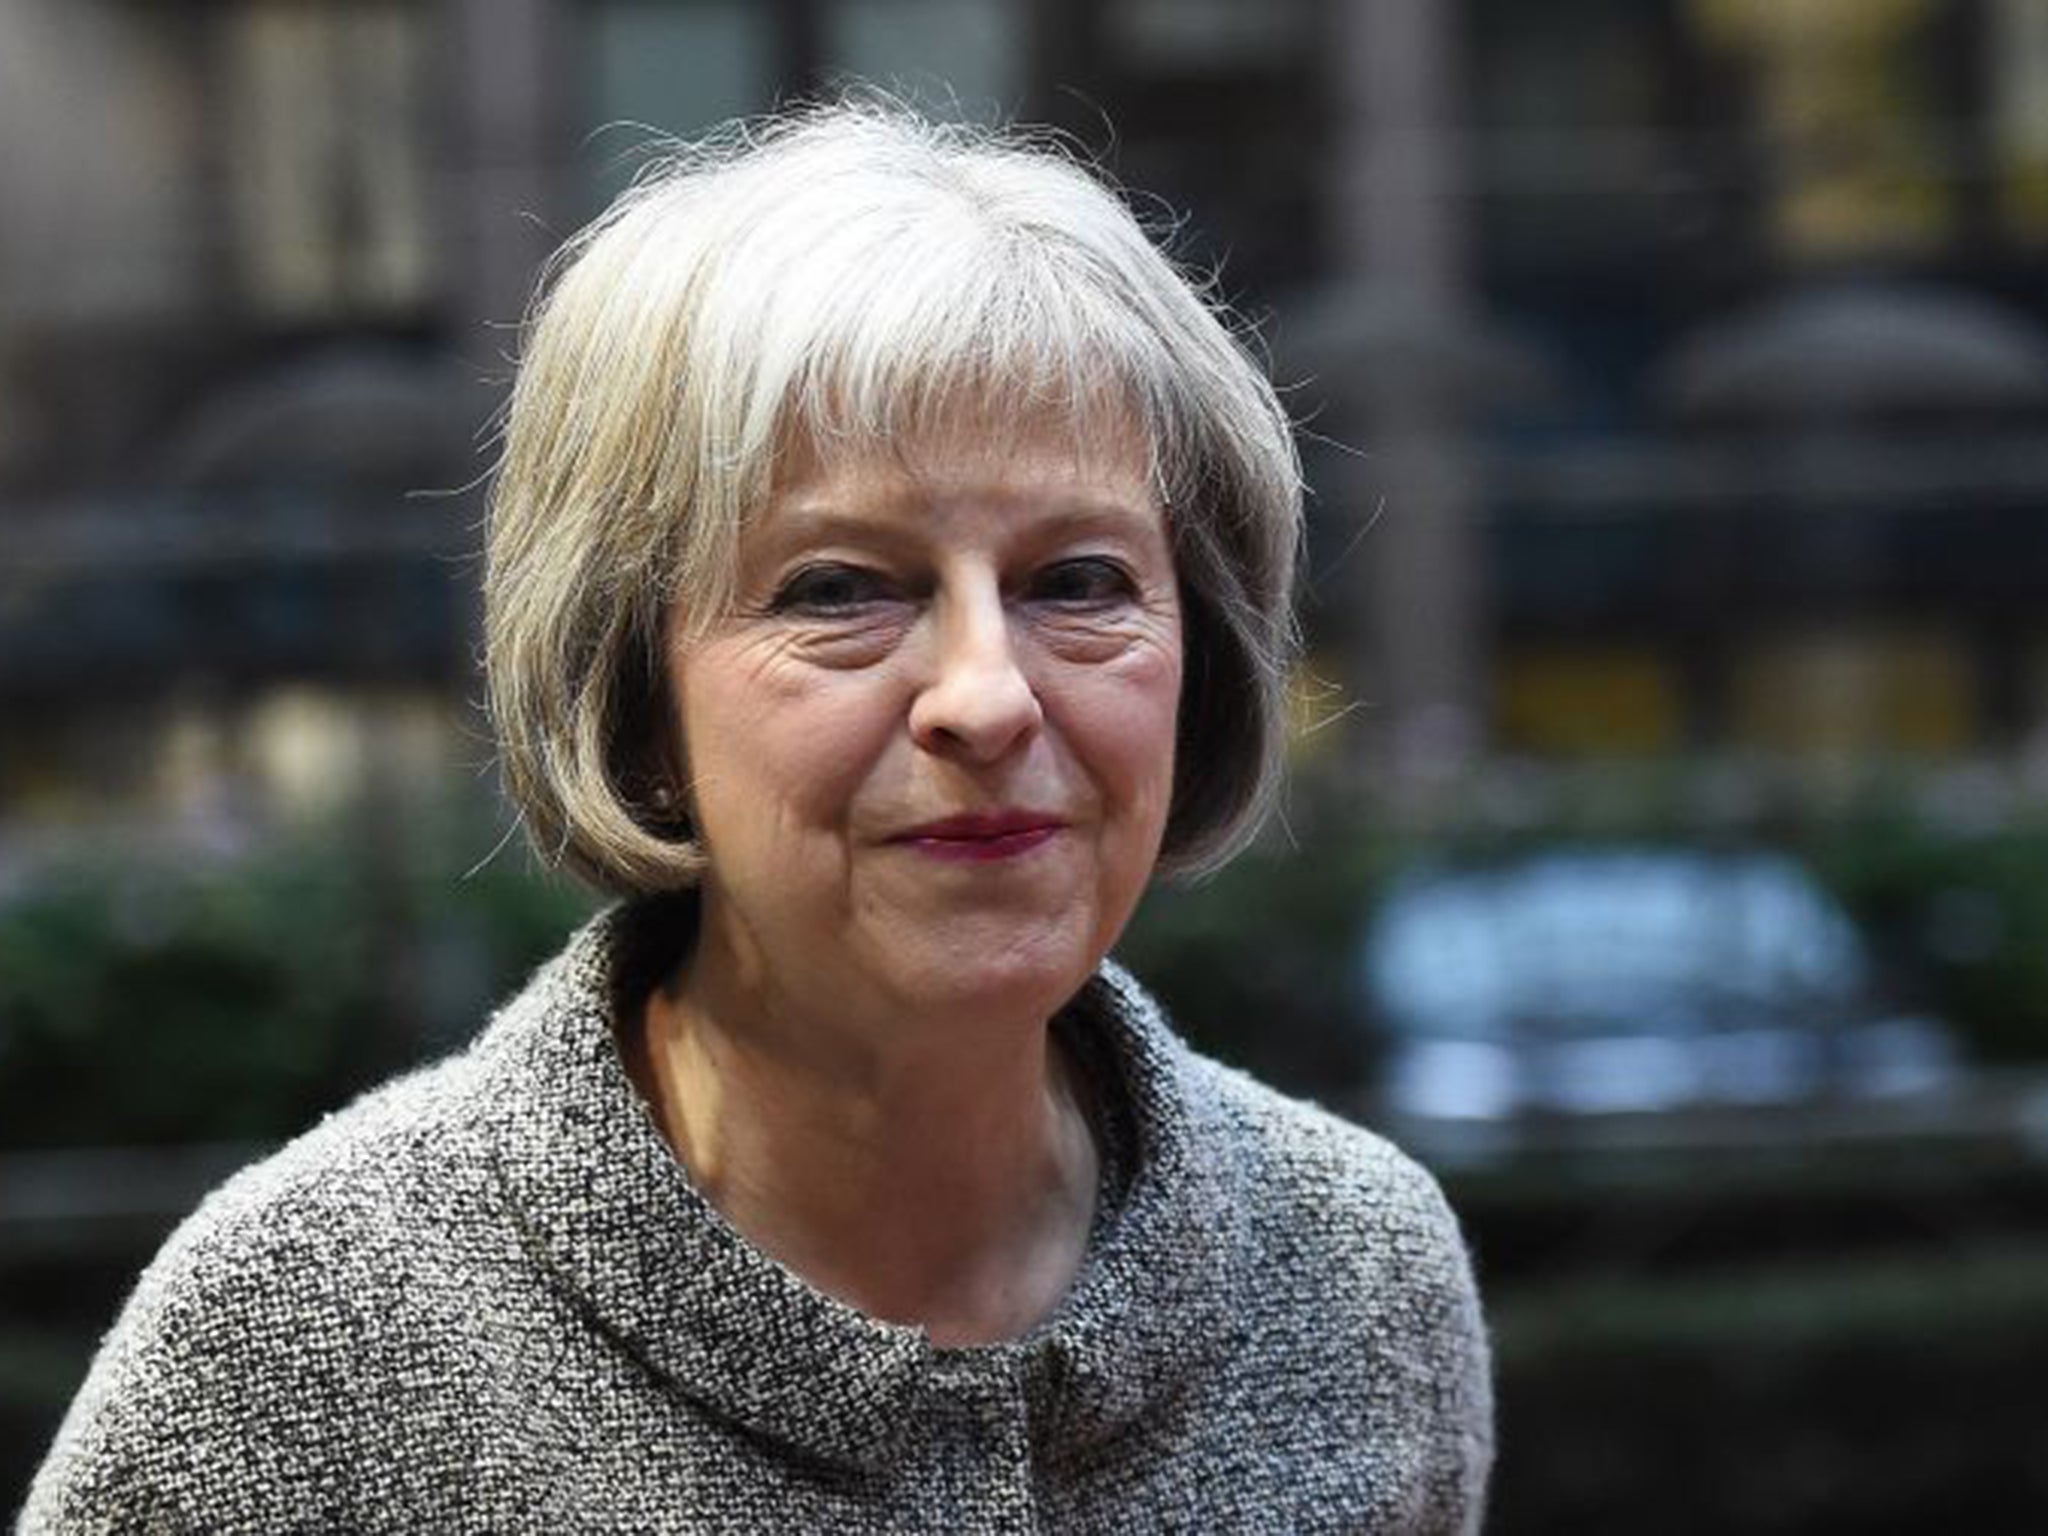 A review ordered by Theresa May, the Home Secretary, is reportedly looking at allowing the SFO, which has been investigating and prosecuting serious frauds for 28 years, to be governed by the two-year-old NCA